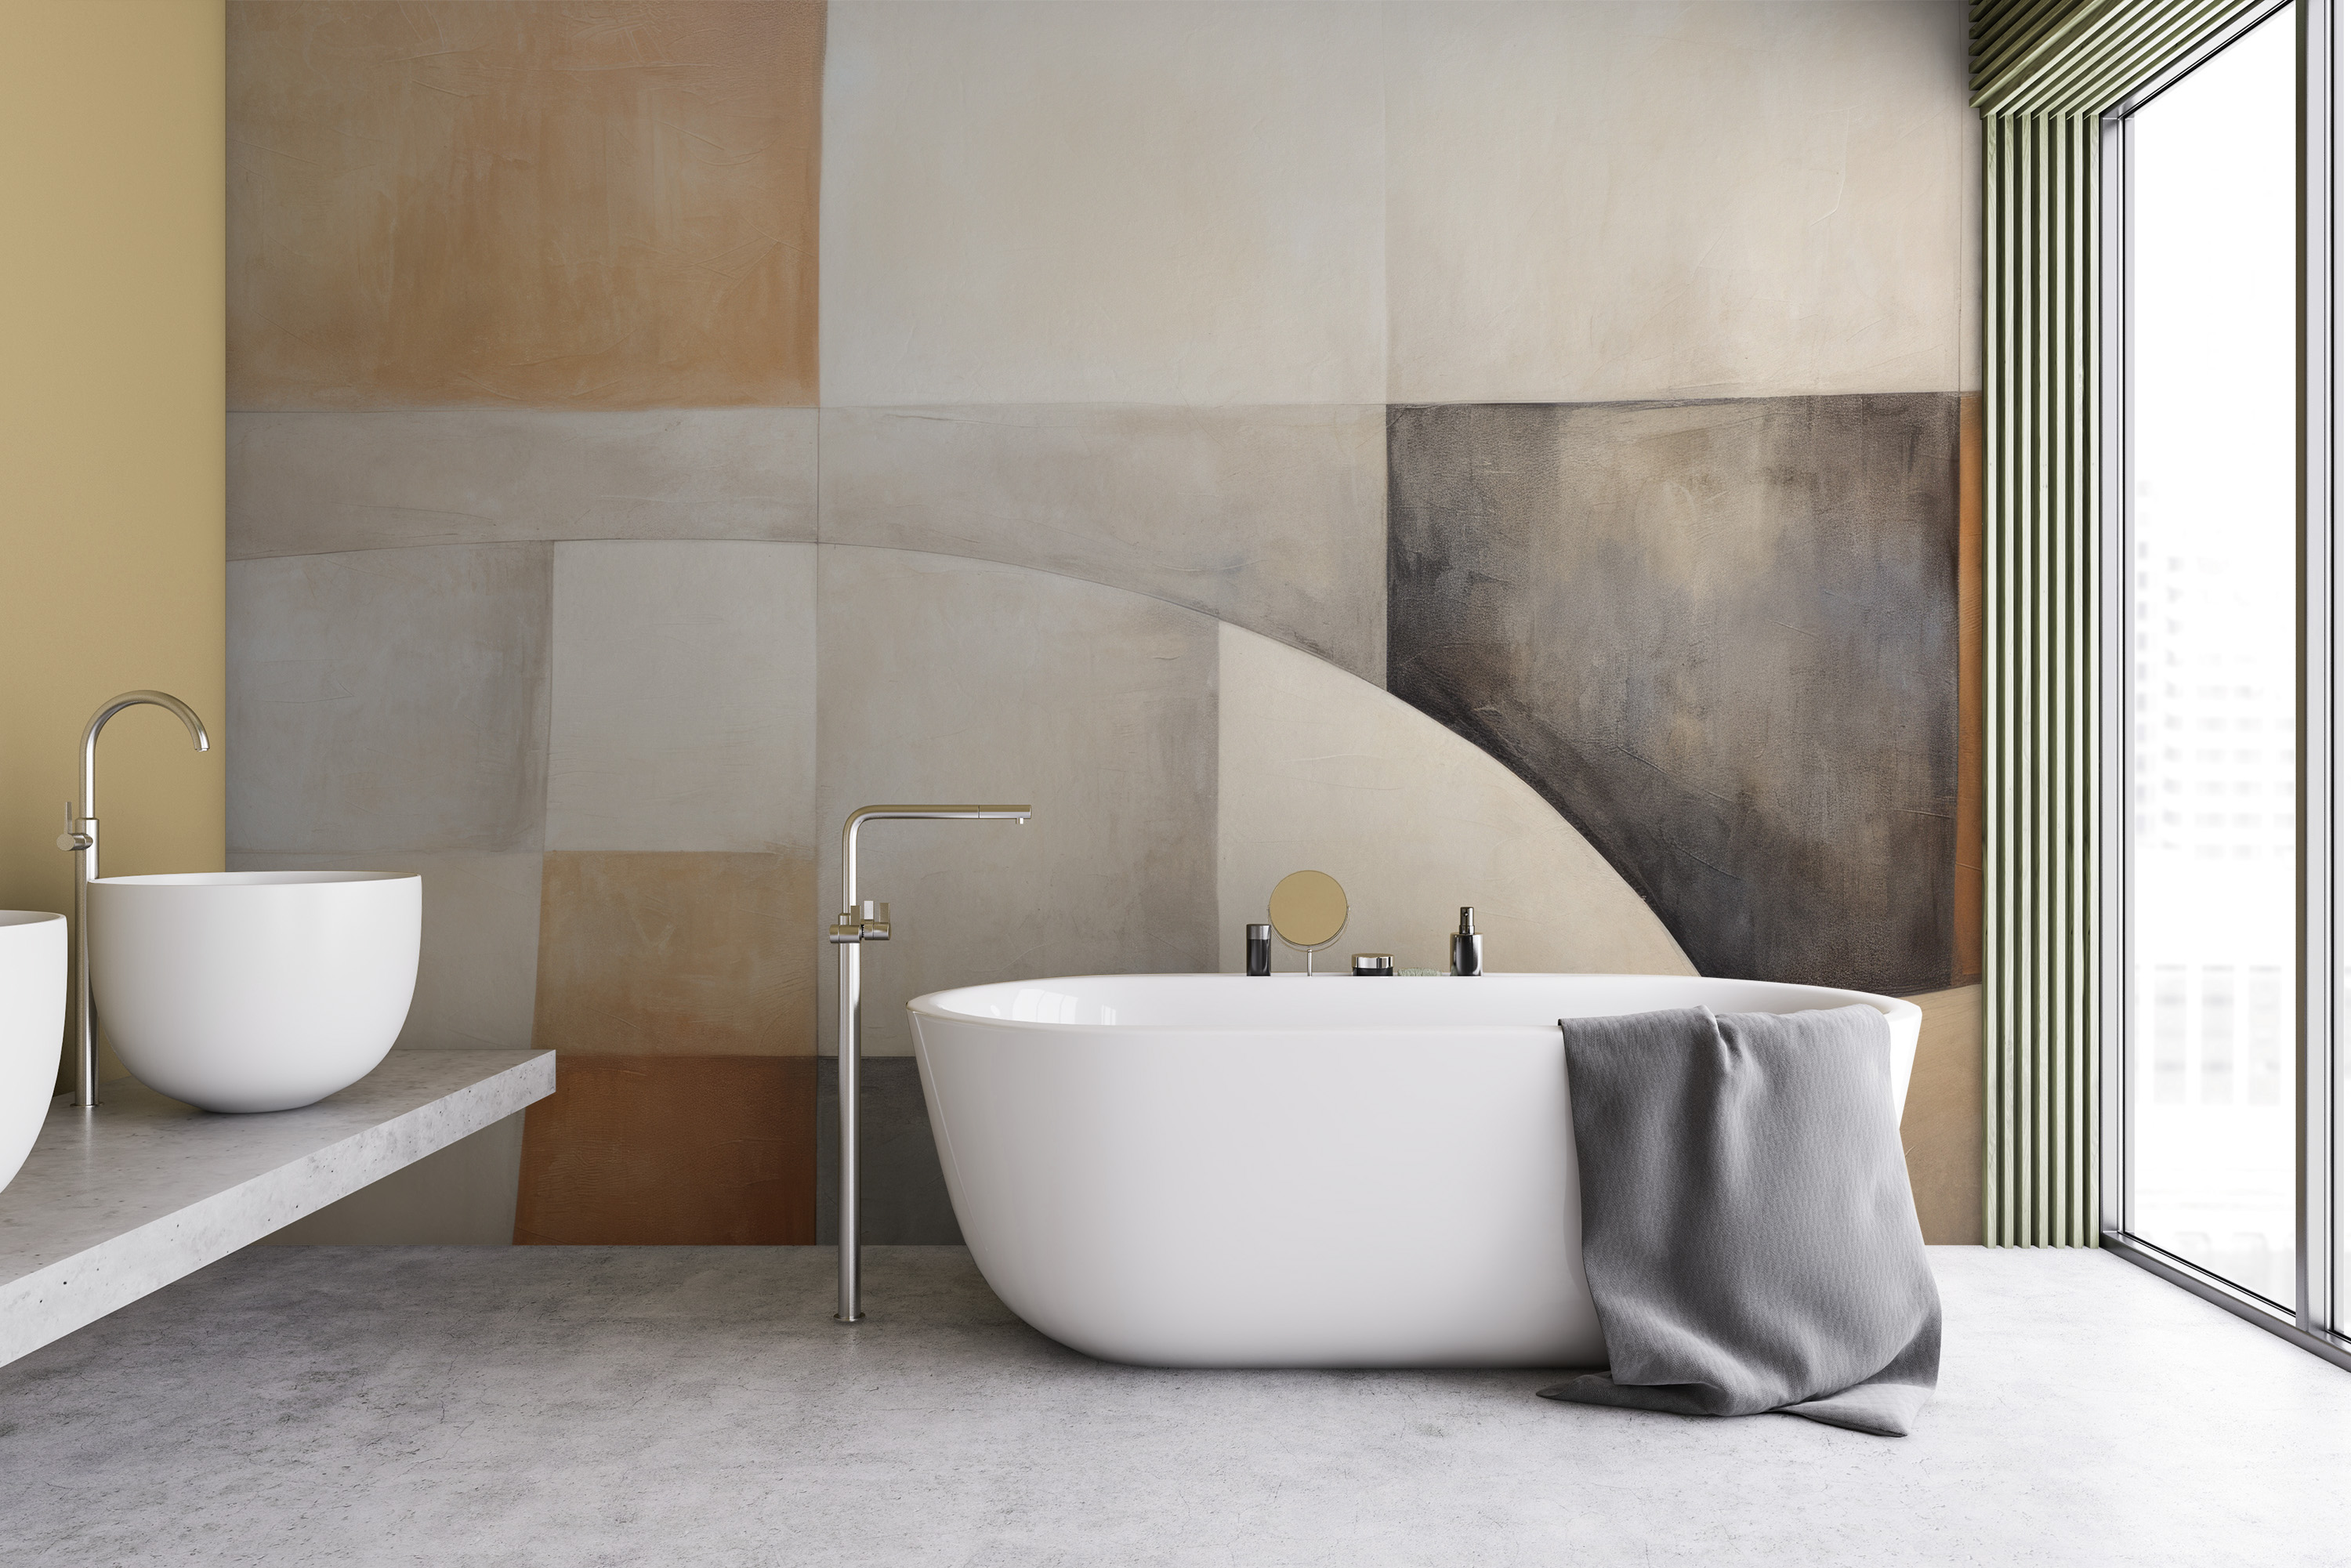 The 'Abstract Harmony' photo wallpaper shows a delicate balance between color and form. It presents a subtle interweaving of warm shades of beige, cream and off-white with the depth of gray and accents of charcoal black. This pattern reminds us of the complex geometry of natural stones, arranged in an irregular mosaic pattern.